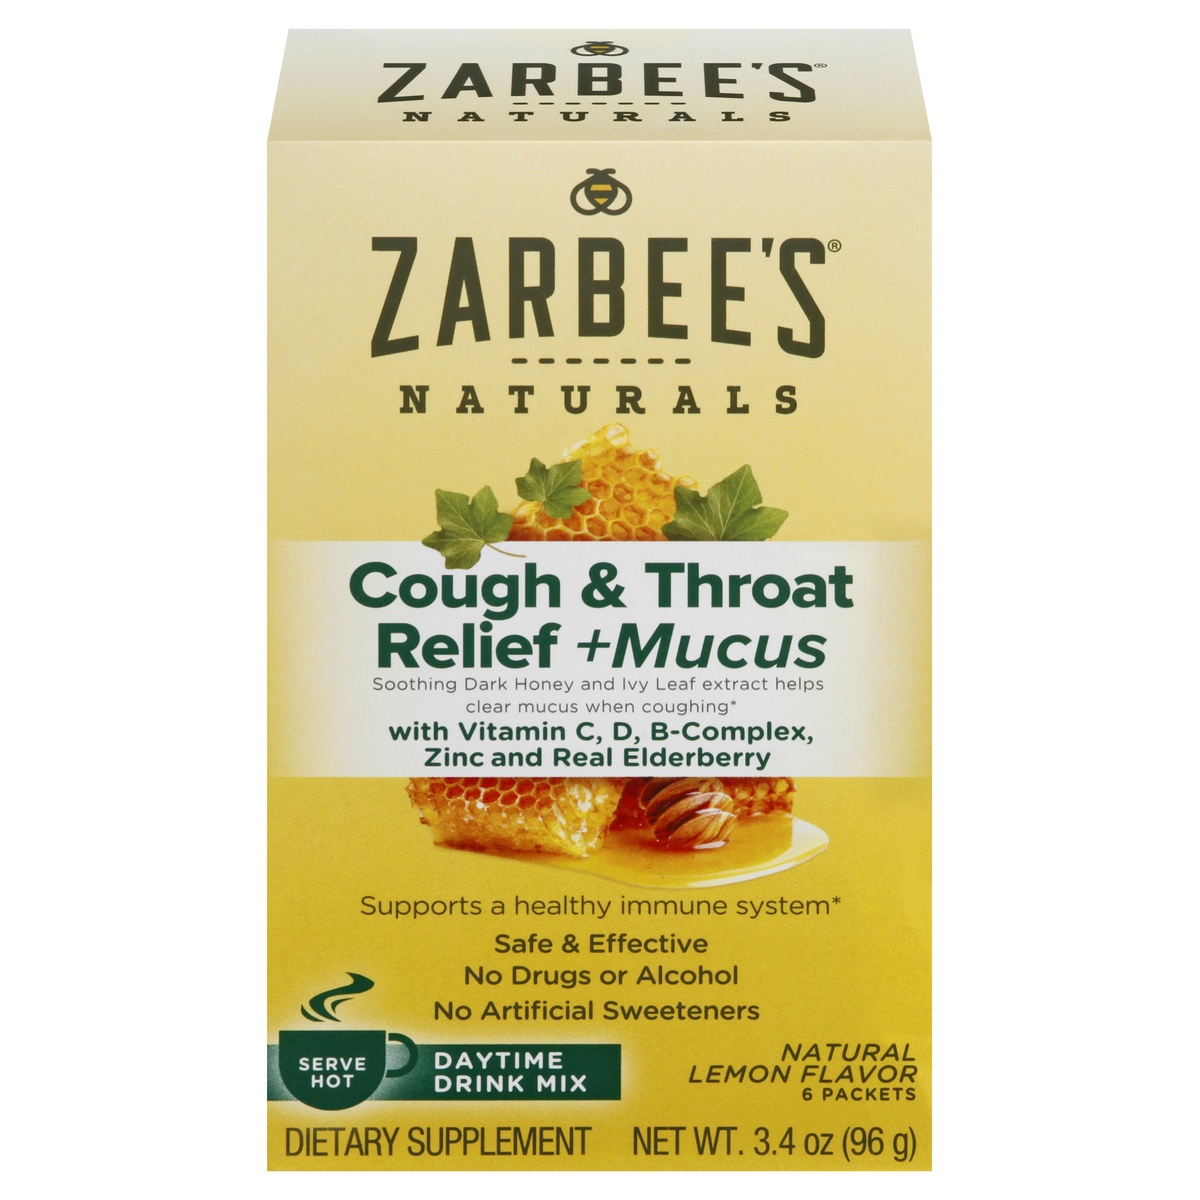 slide 1 of 6, Zarbee's Naturals Cough & Throat Relief + Mucus, Daytime, Drink Mix, Natural Lemon Flavor, 6 ct